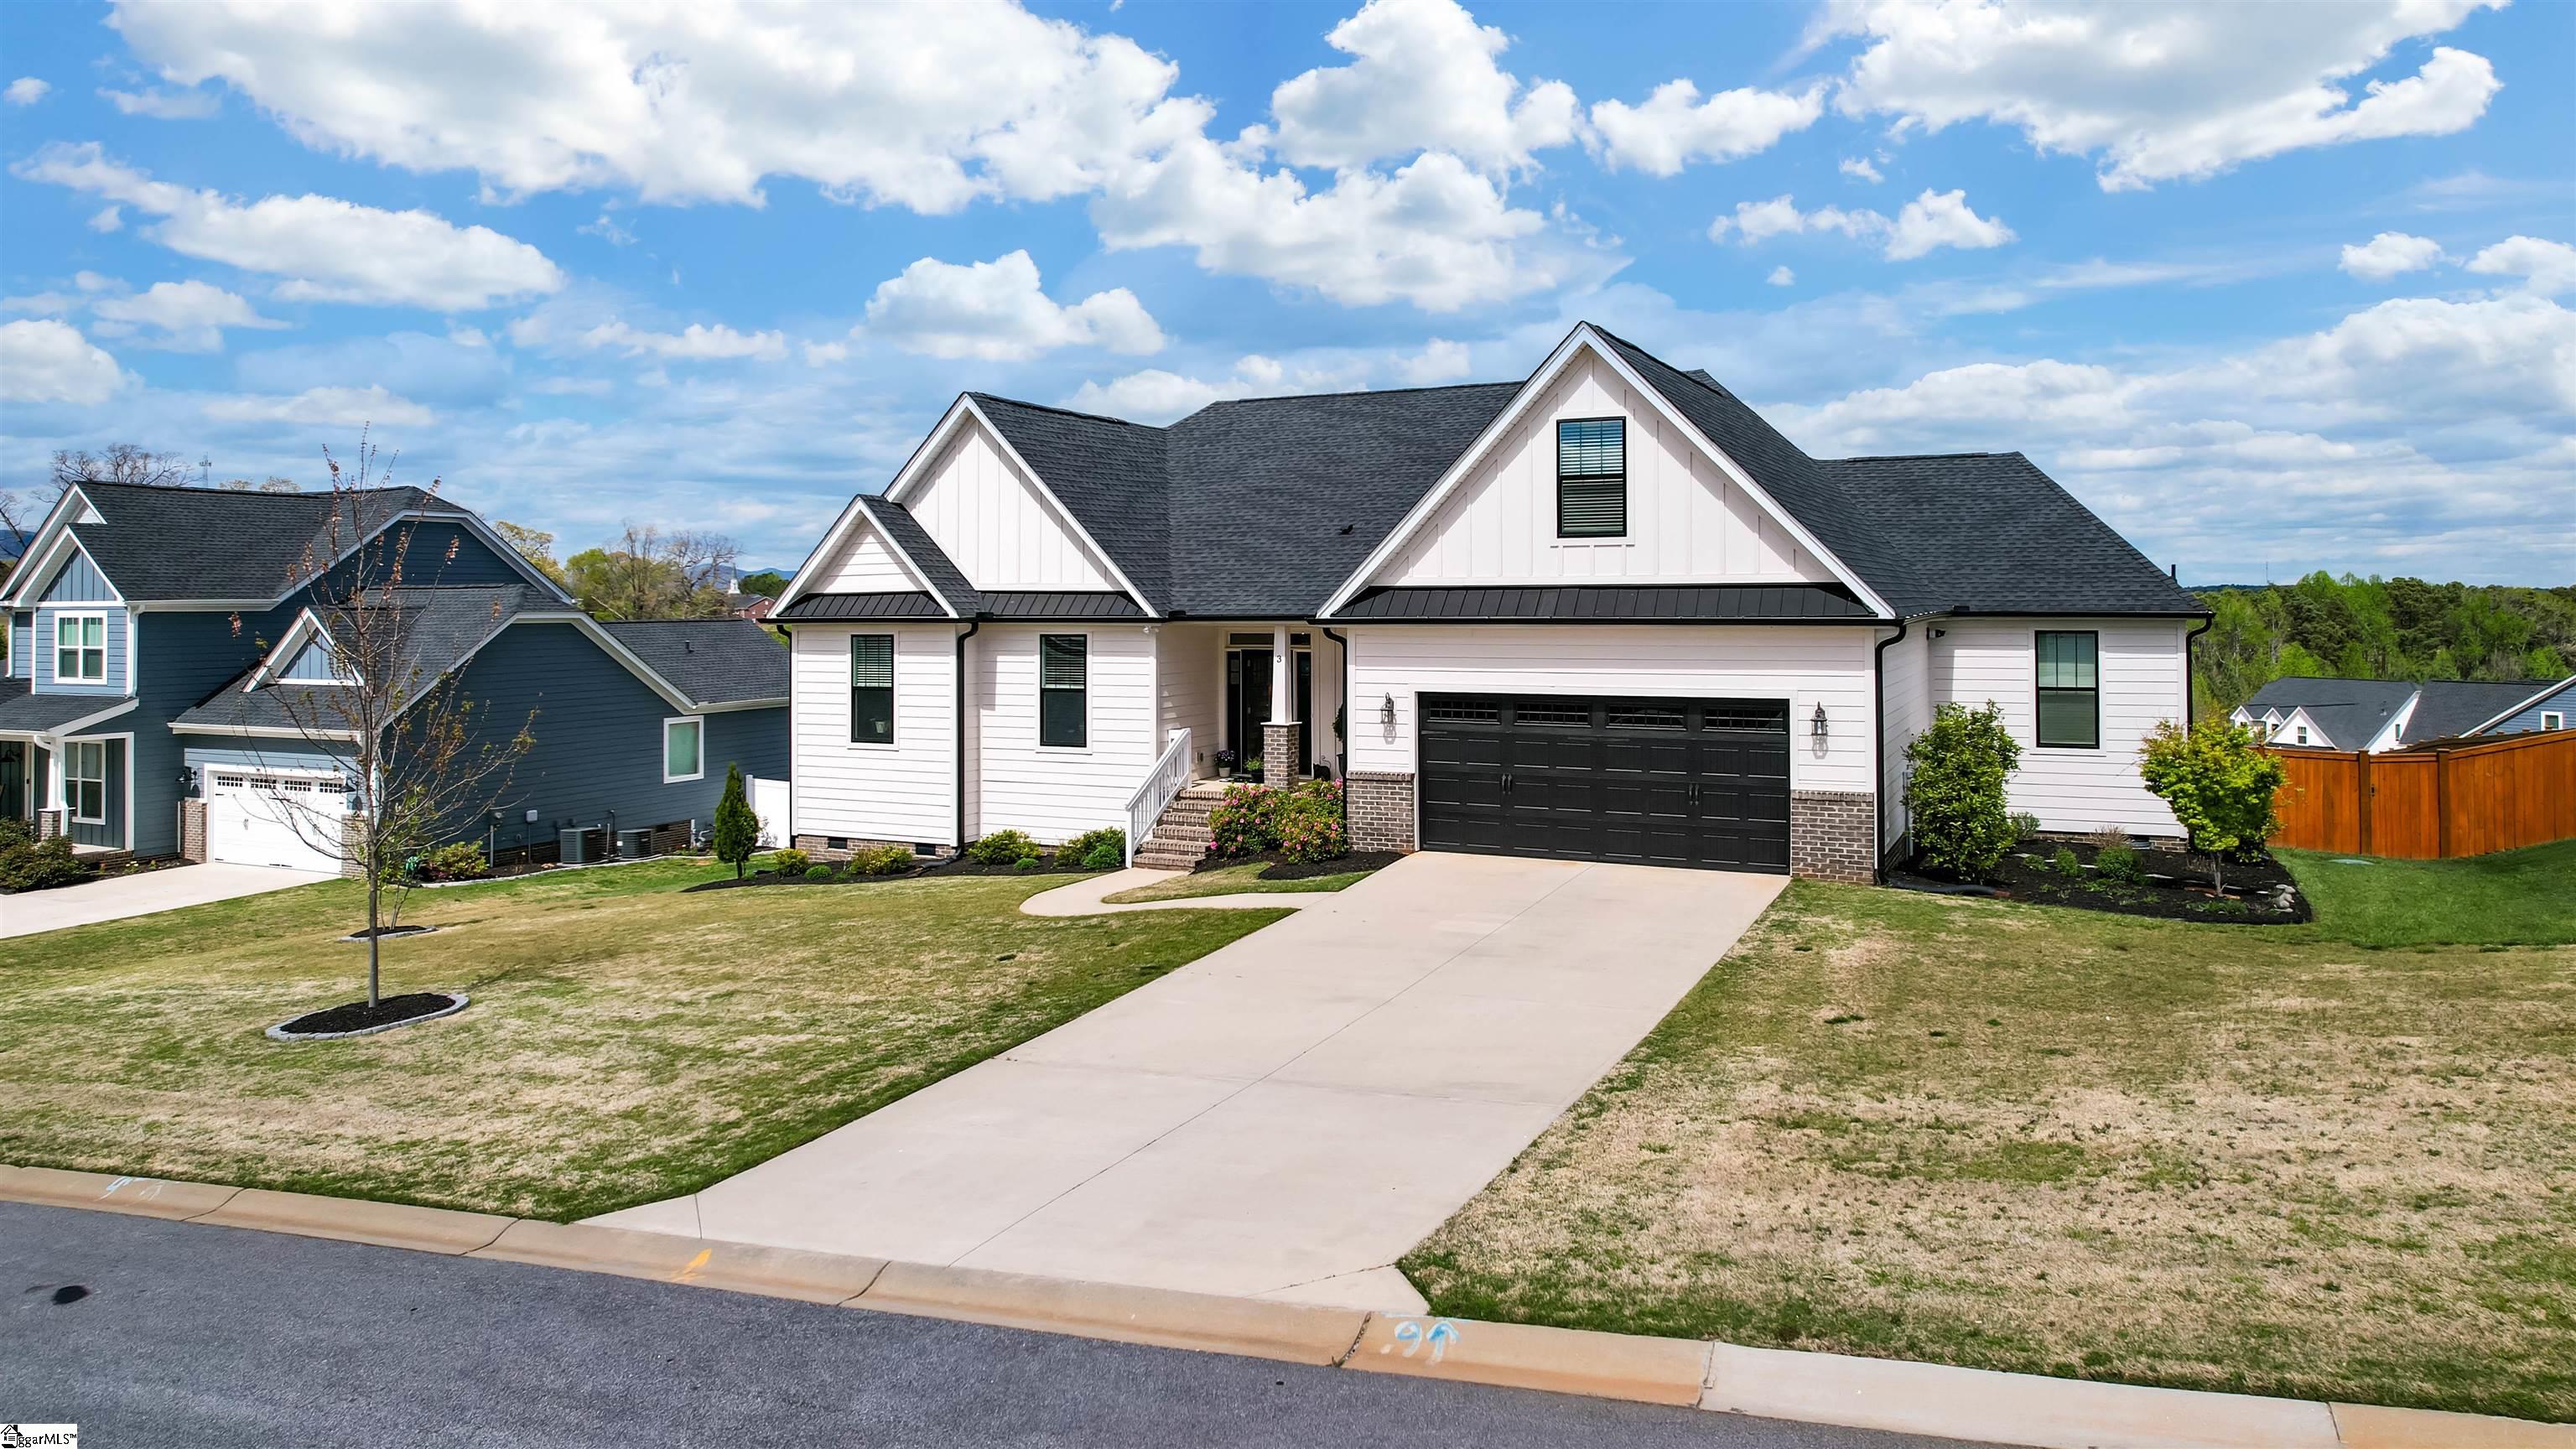 3 Cheswood Court Greer, SC 29651